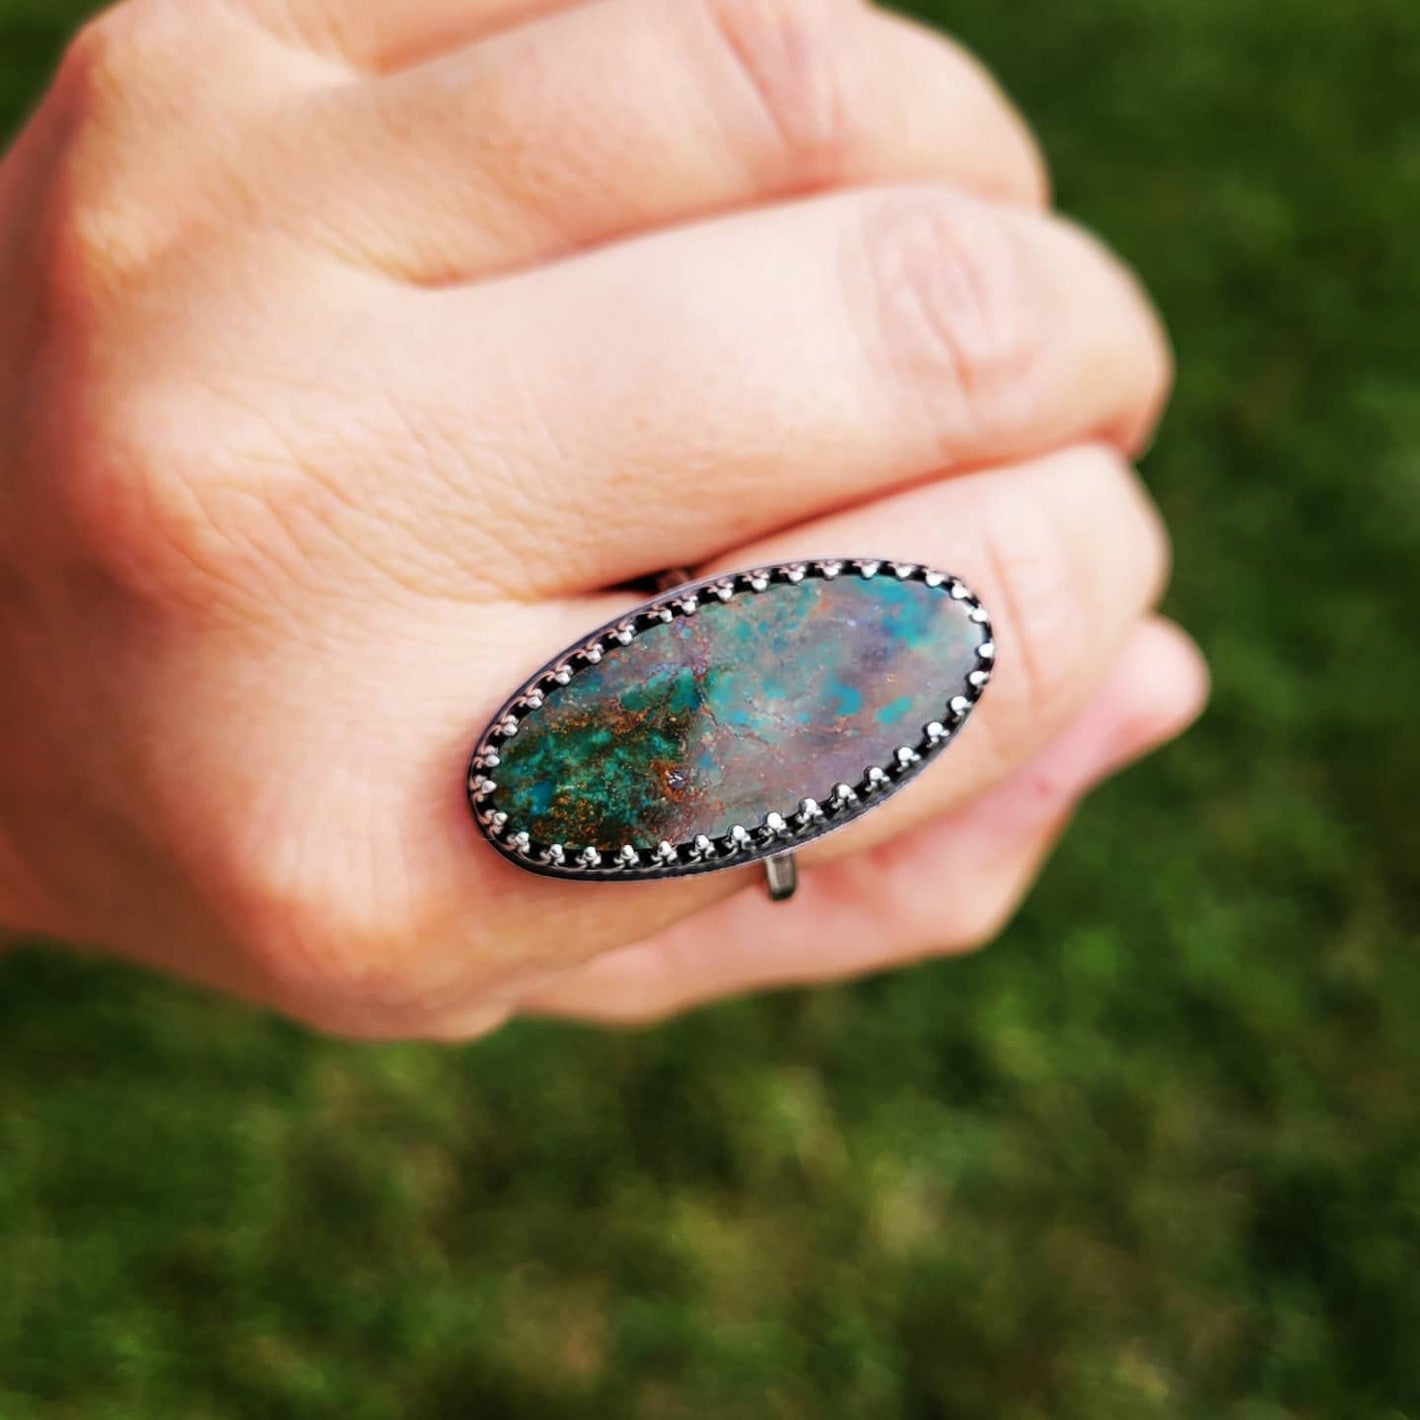 Turquoise stone set in sterling silver. Handcrafted 